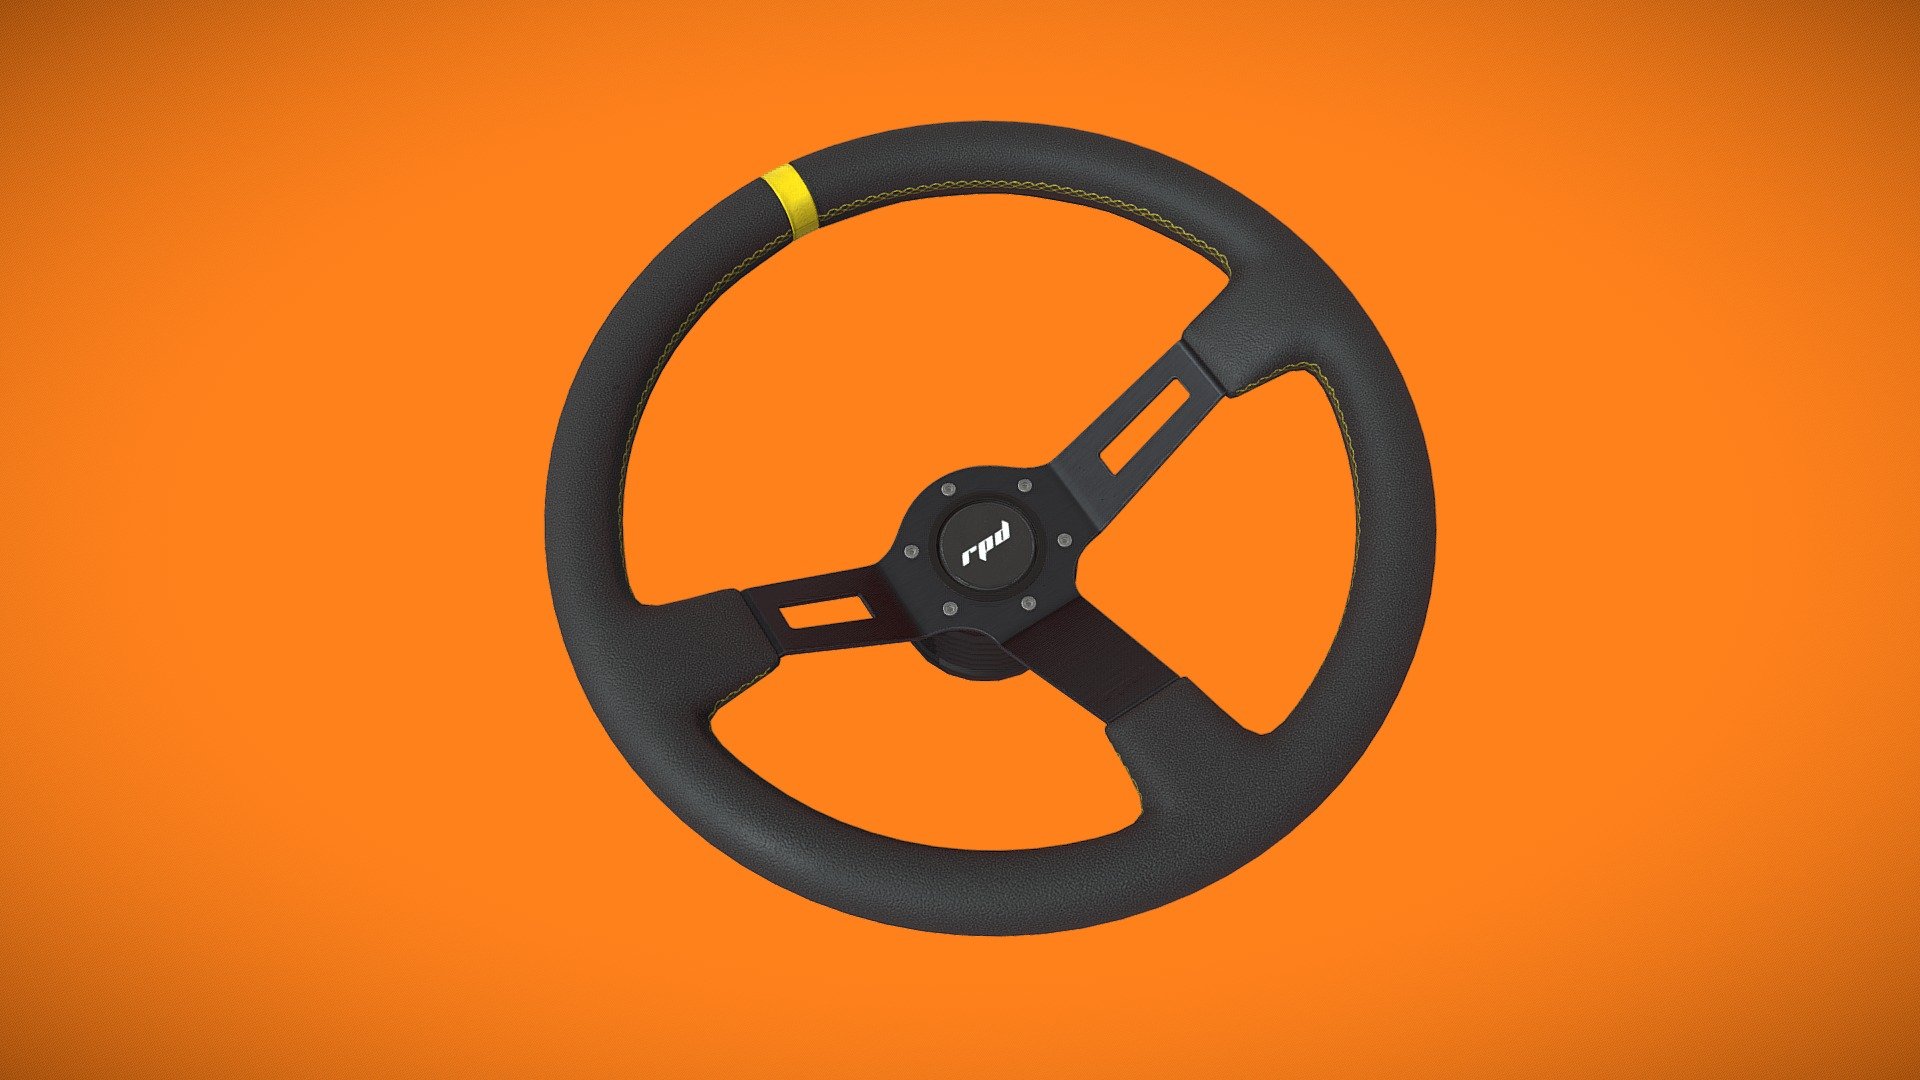 Deep dish steering wheel model I made few months ago for my Track Xsara project. Freshly baked and textured in Substance painter mostly to try out some stitching tehniques.

Based on Toorace Grid - Racing Steering Wheel - 3D model by Robert Prispilović (@rprispil) 3d model